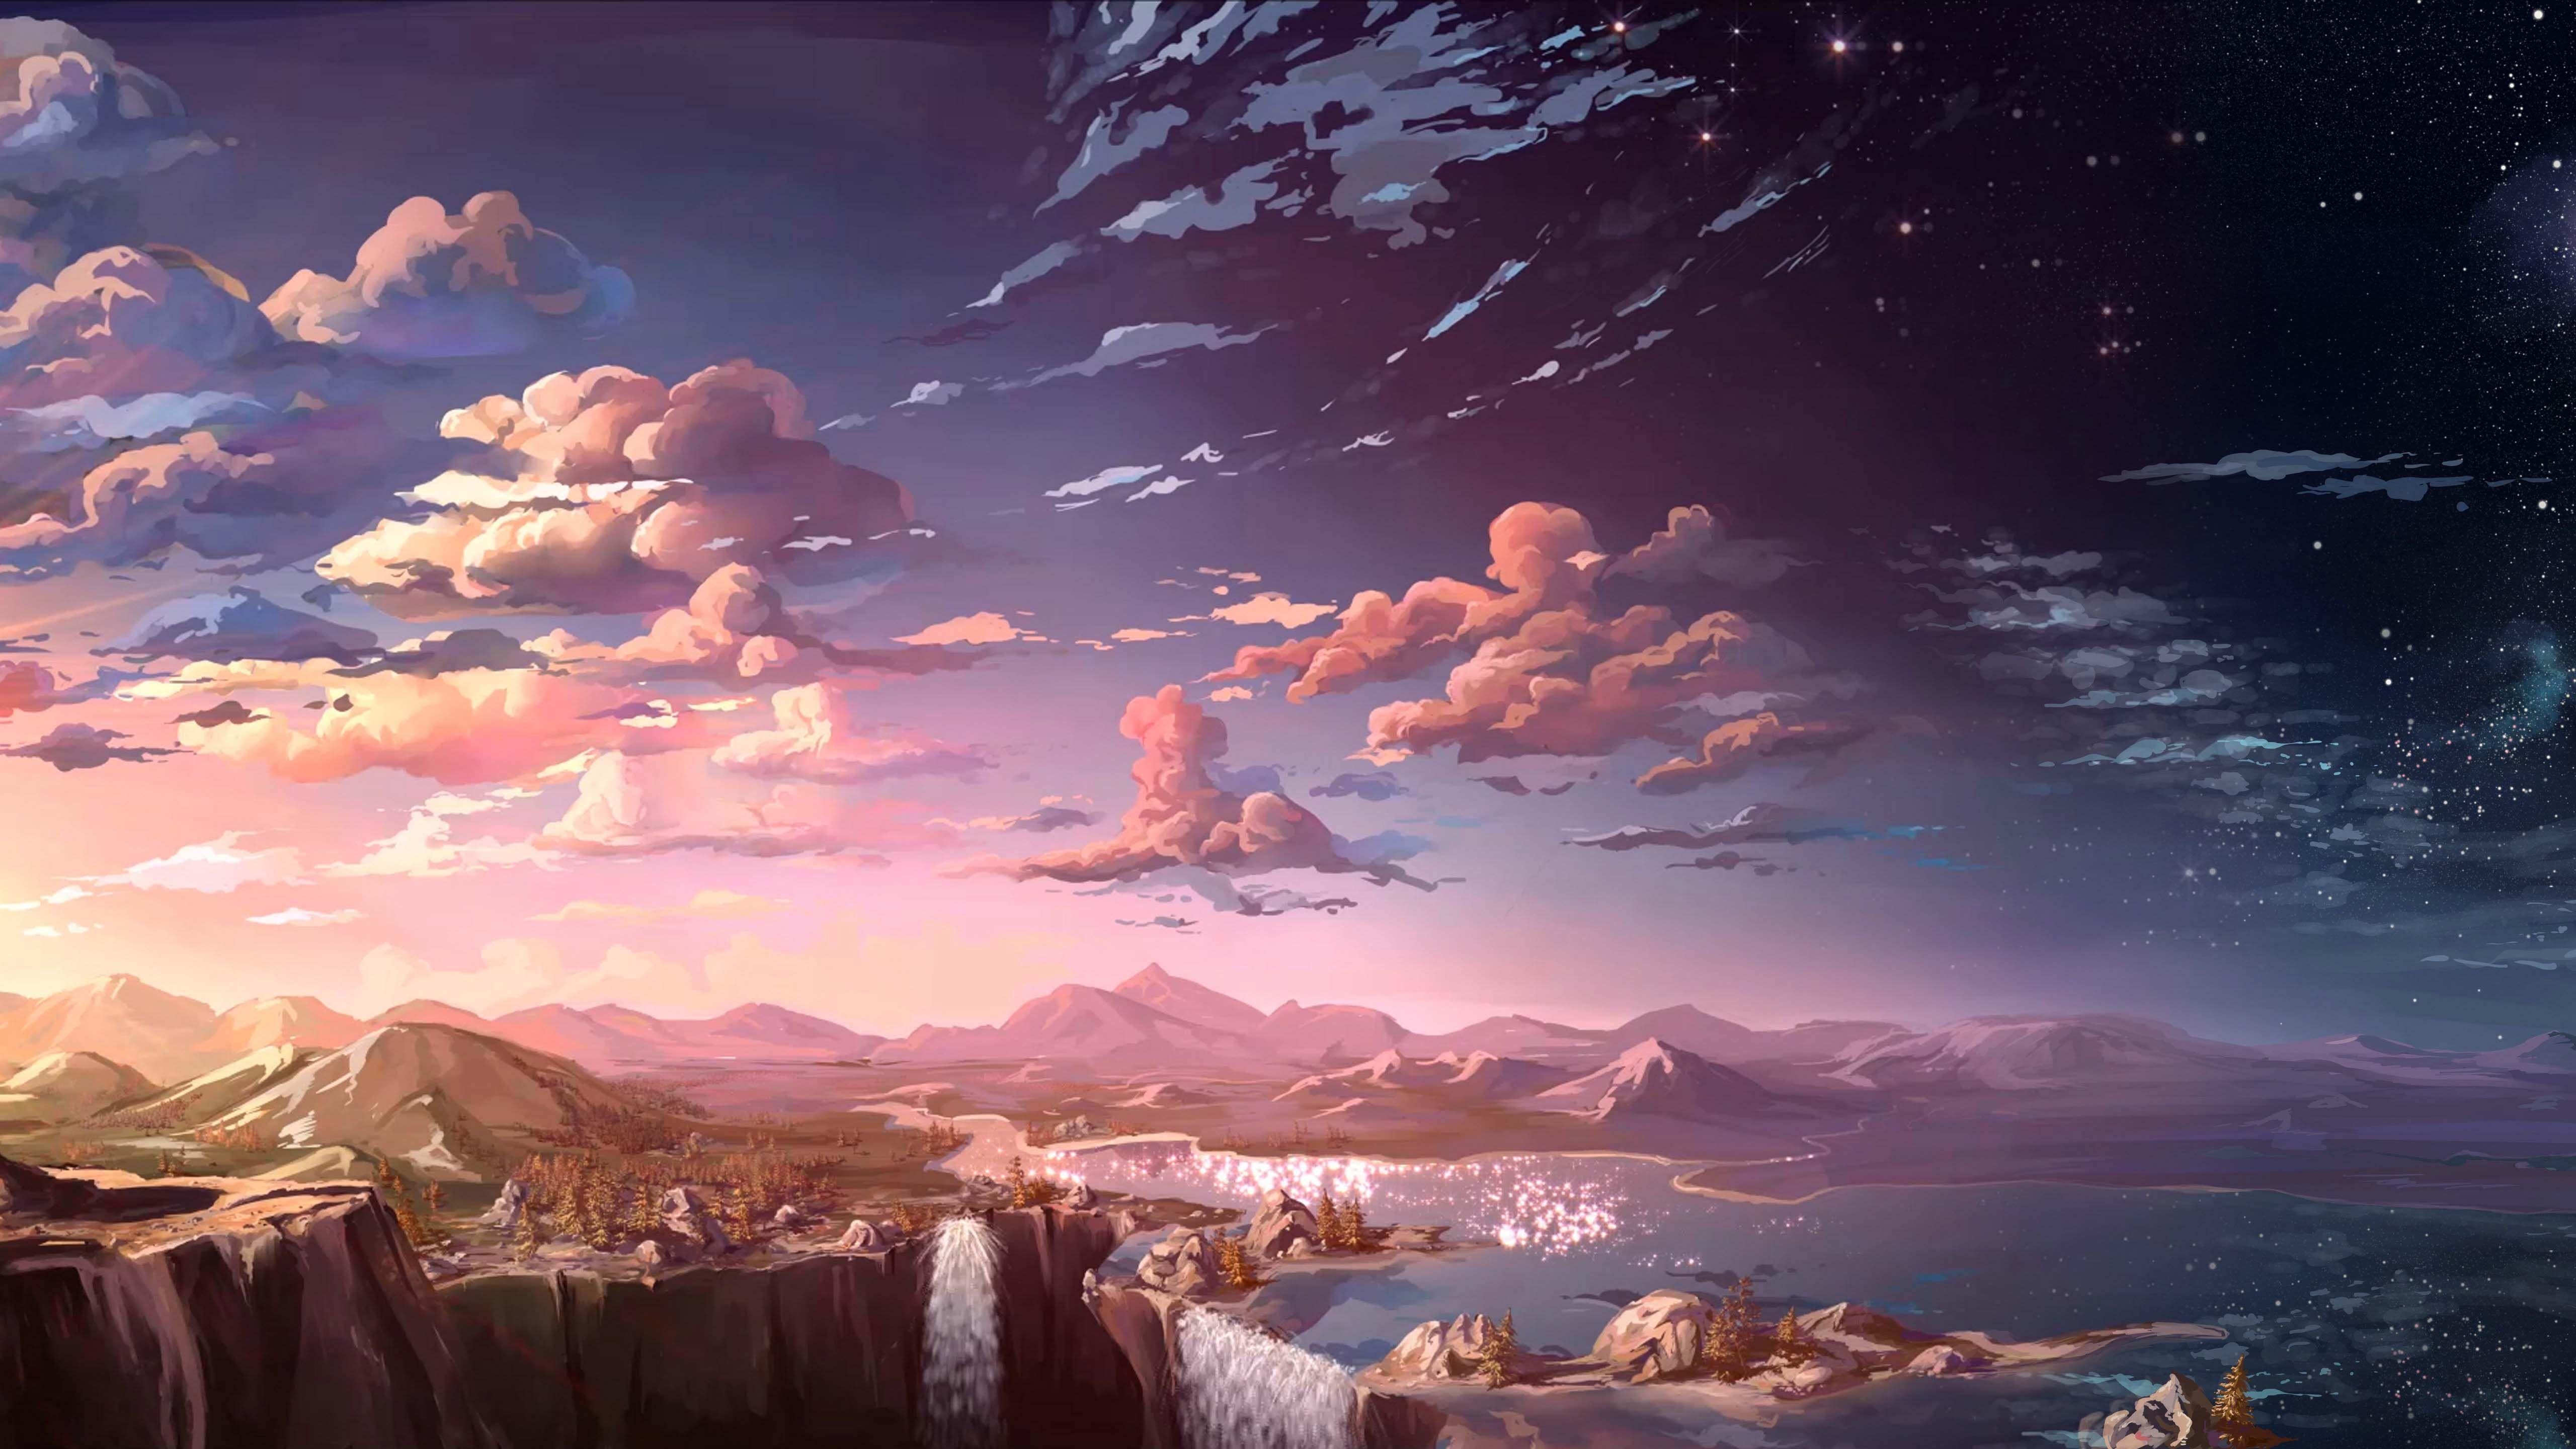 A painting of the sky and mountains with clouds - Calming, landscape, Chromebook, anime landscape, scenery